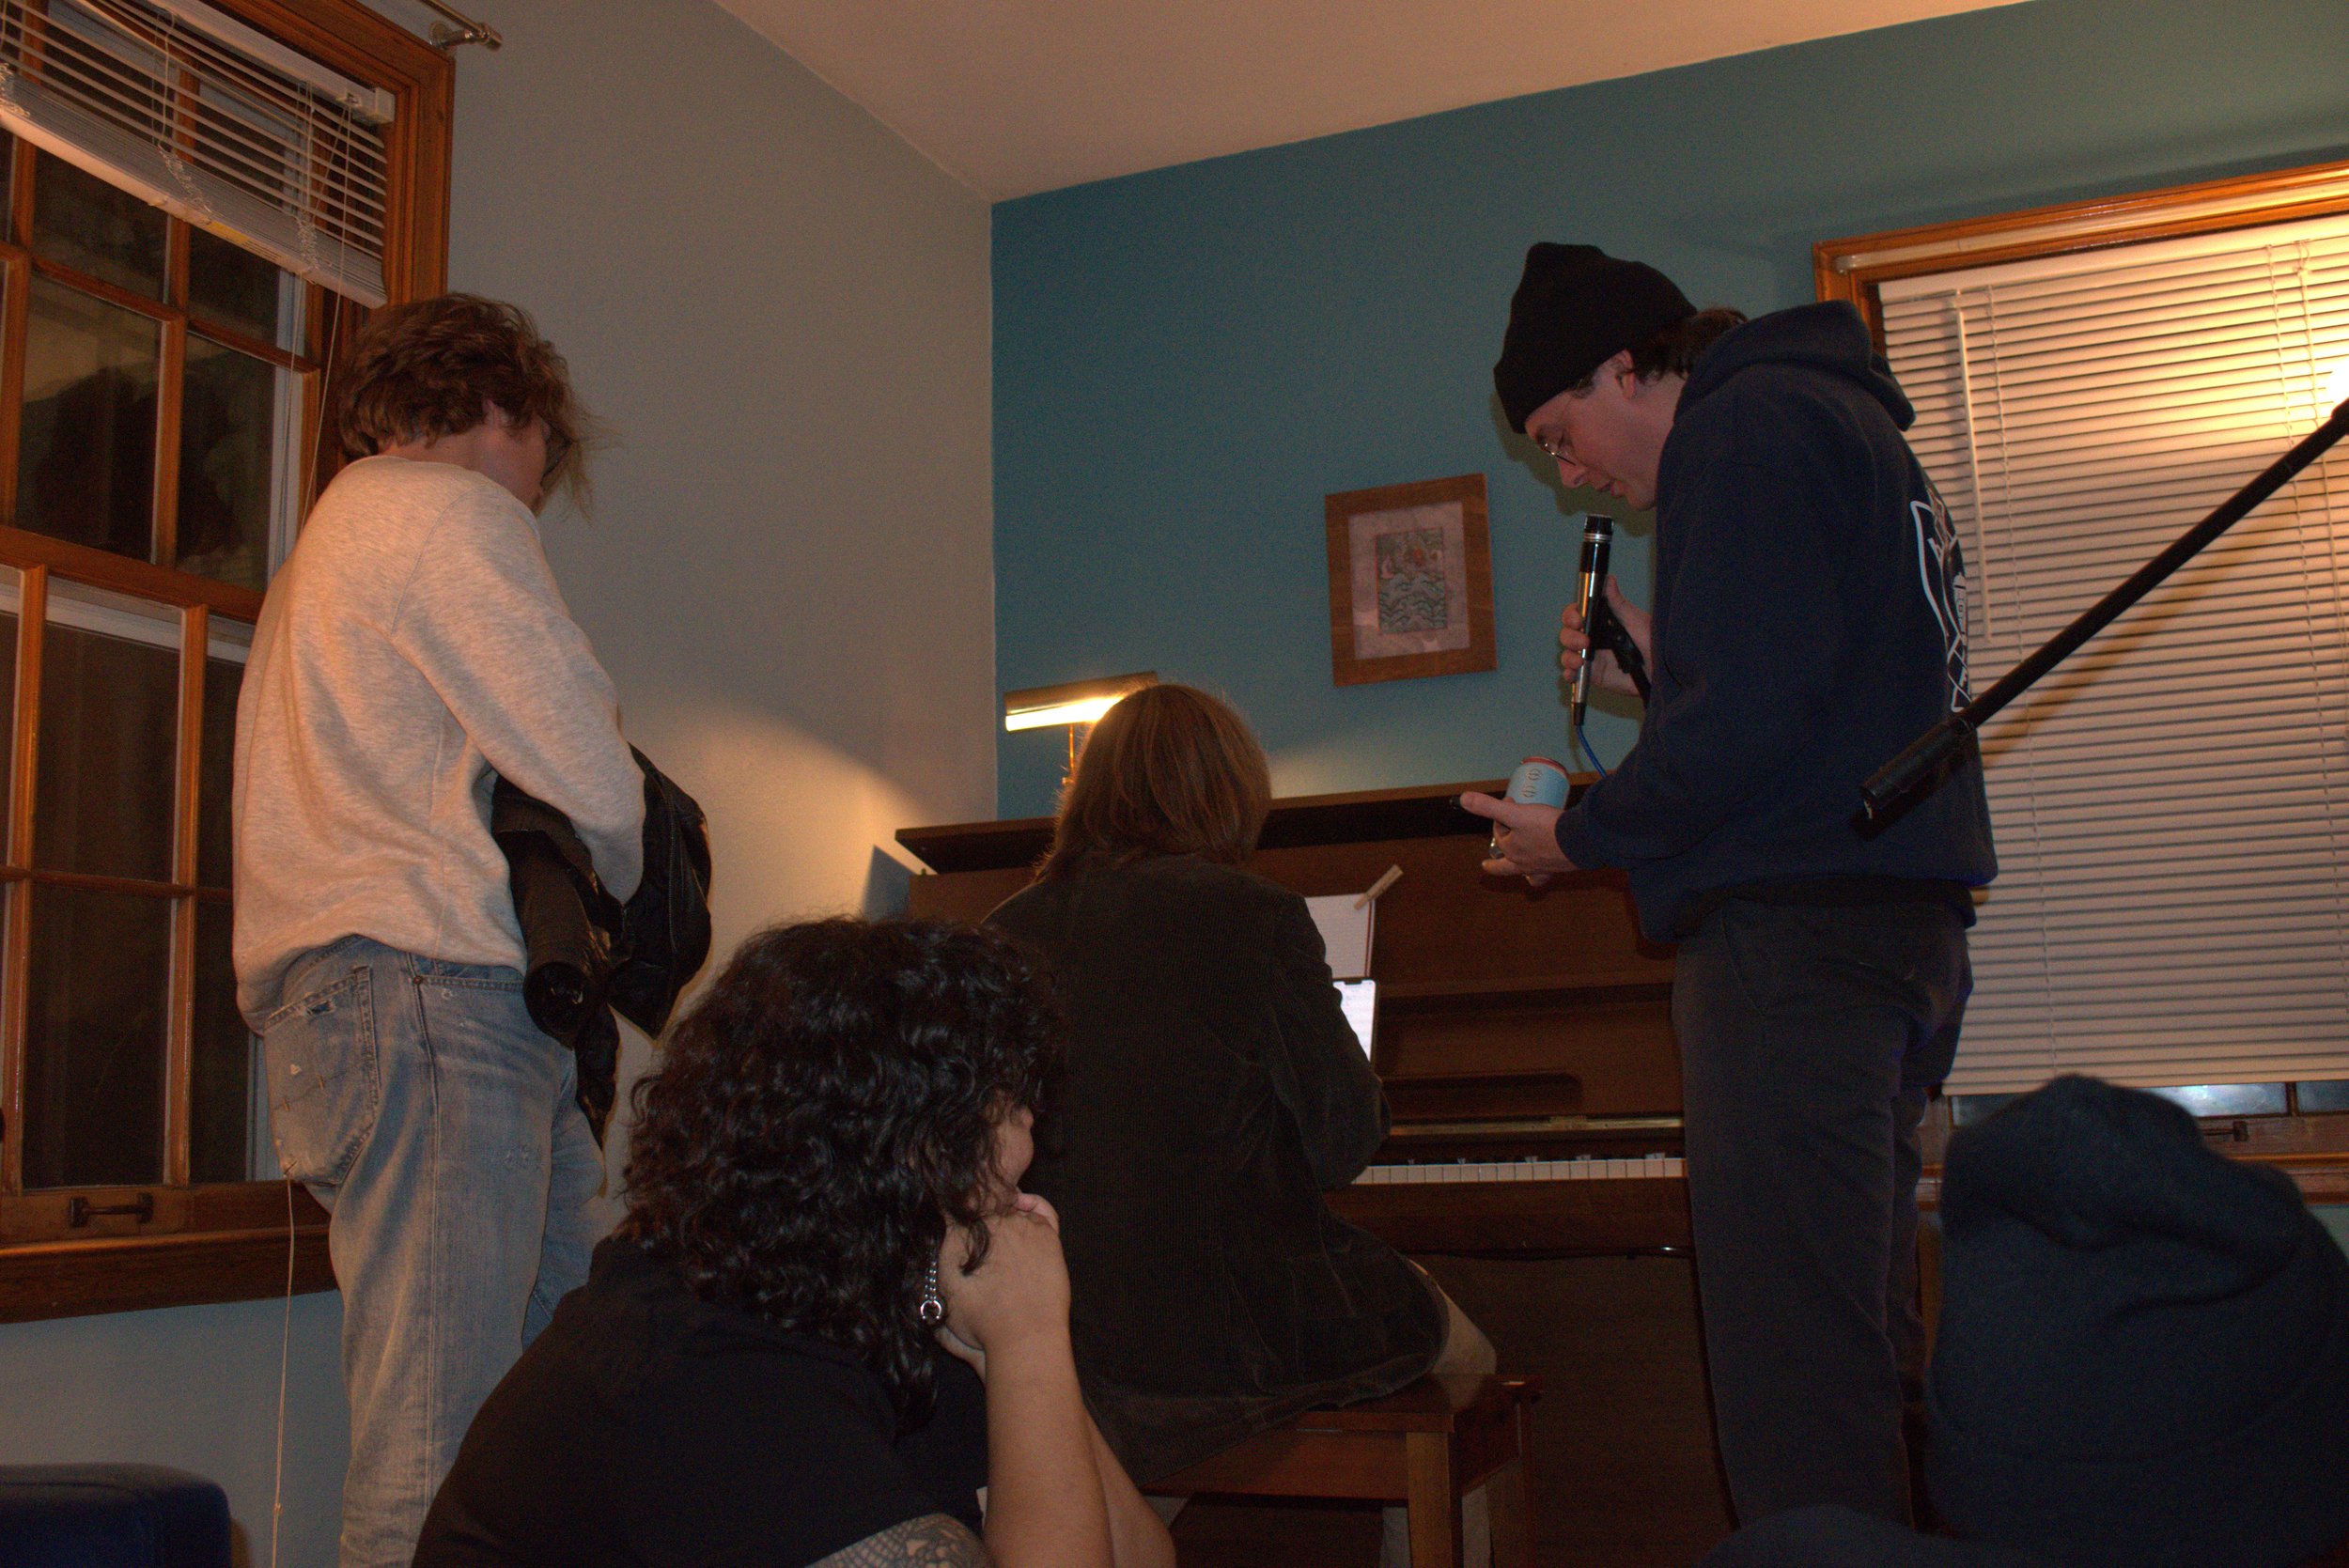 Neil-on-piano-with-guest.jpg